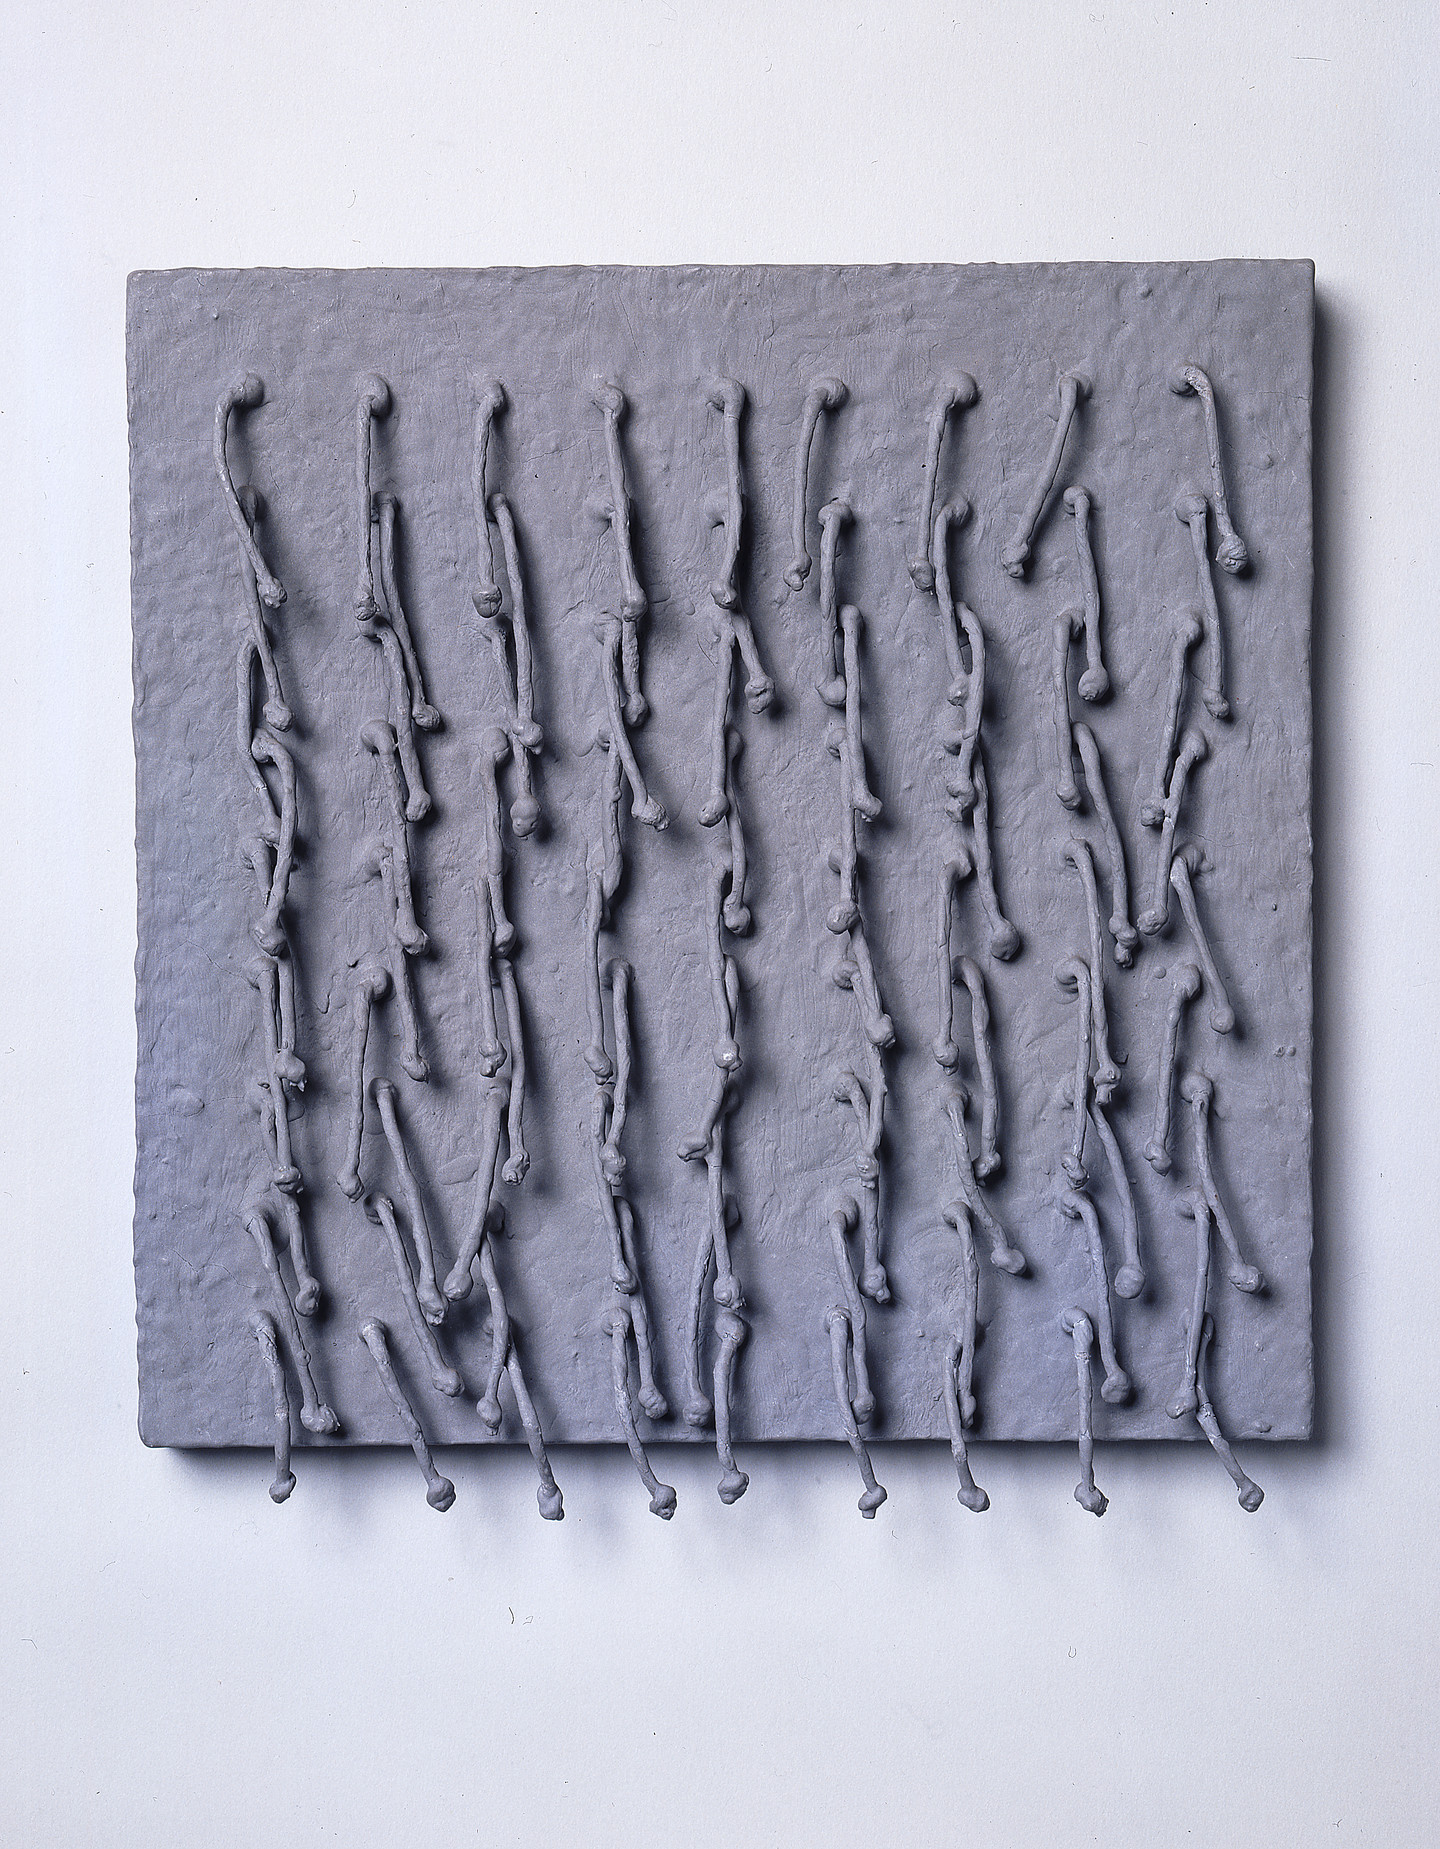 Short, knotted cords, arranged in a symmetrical 9-by-9 grid emerge from a square panel and hang down. Thick, matte-gray paint coats the entire piece, adding rough texture to the panel and stiffening the cords into positions that cast irregular shadows across the work’s surface.